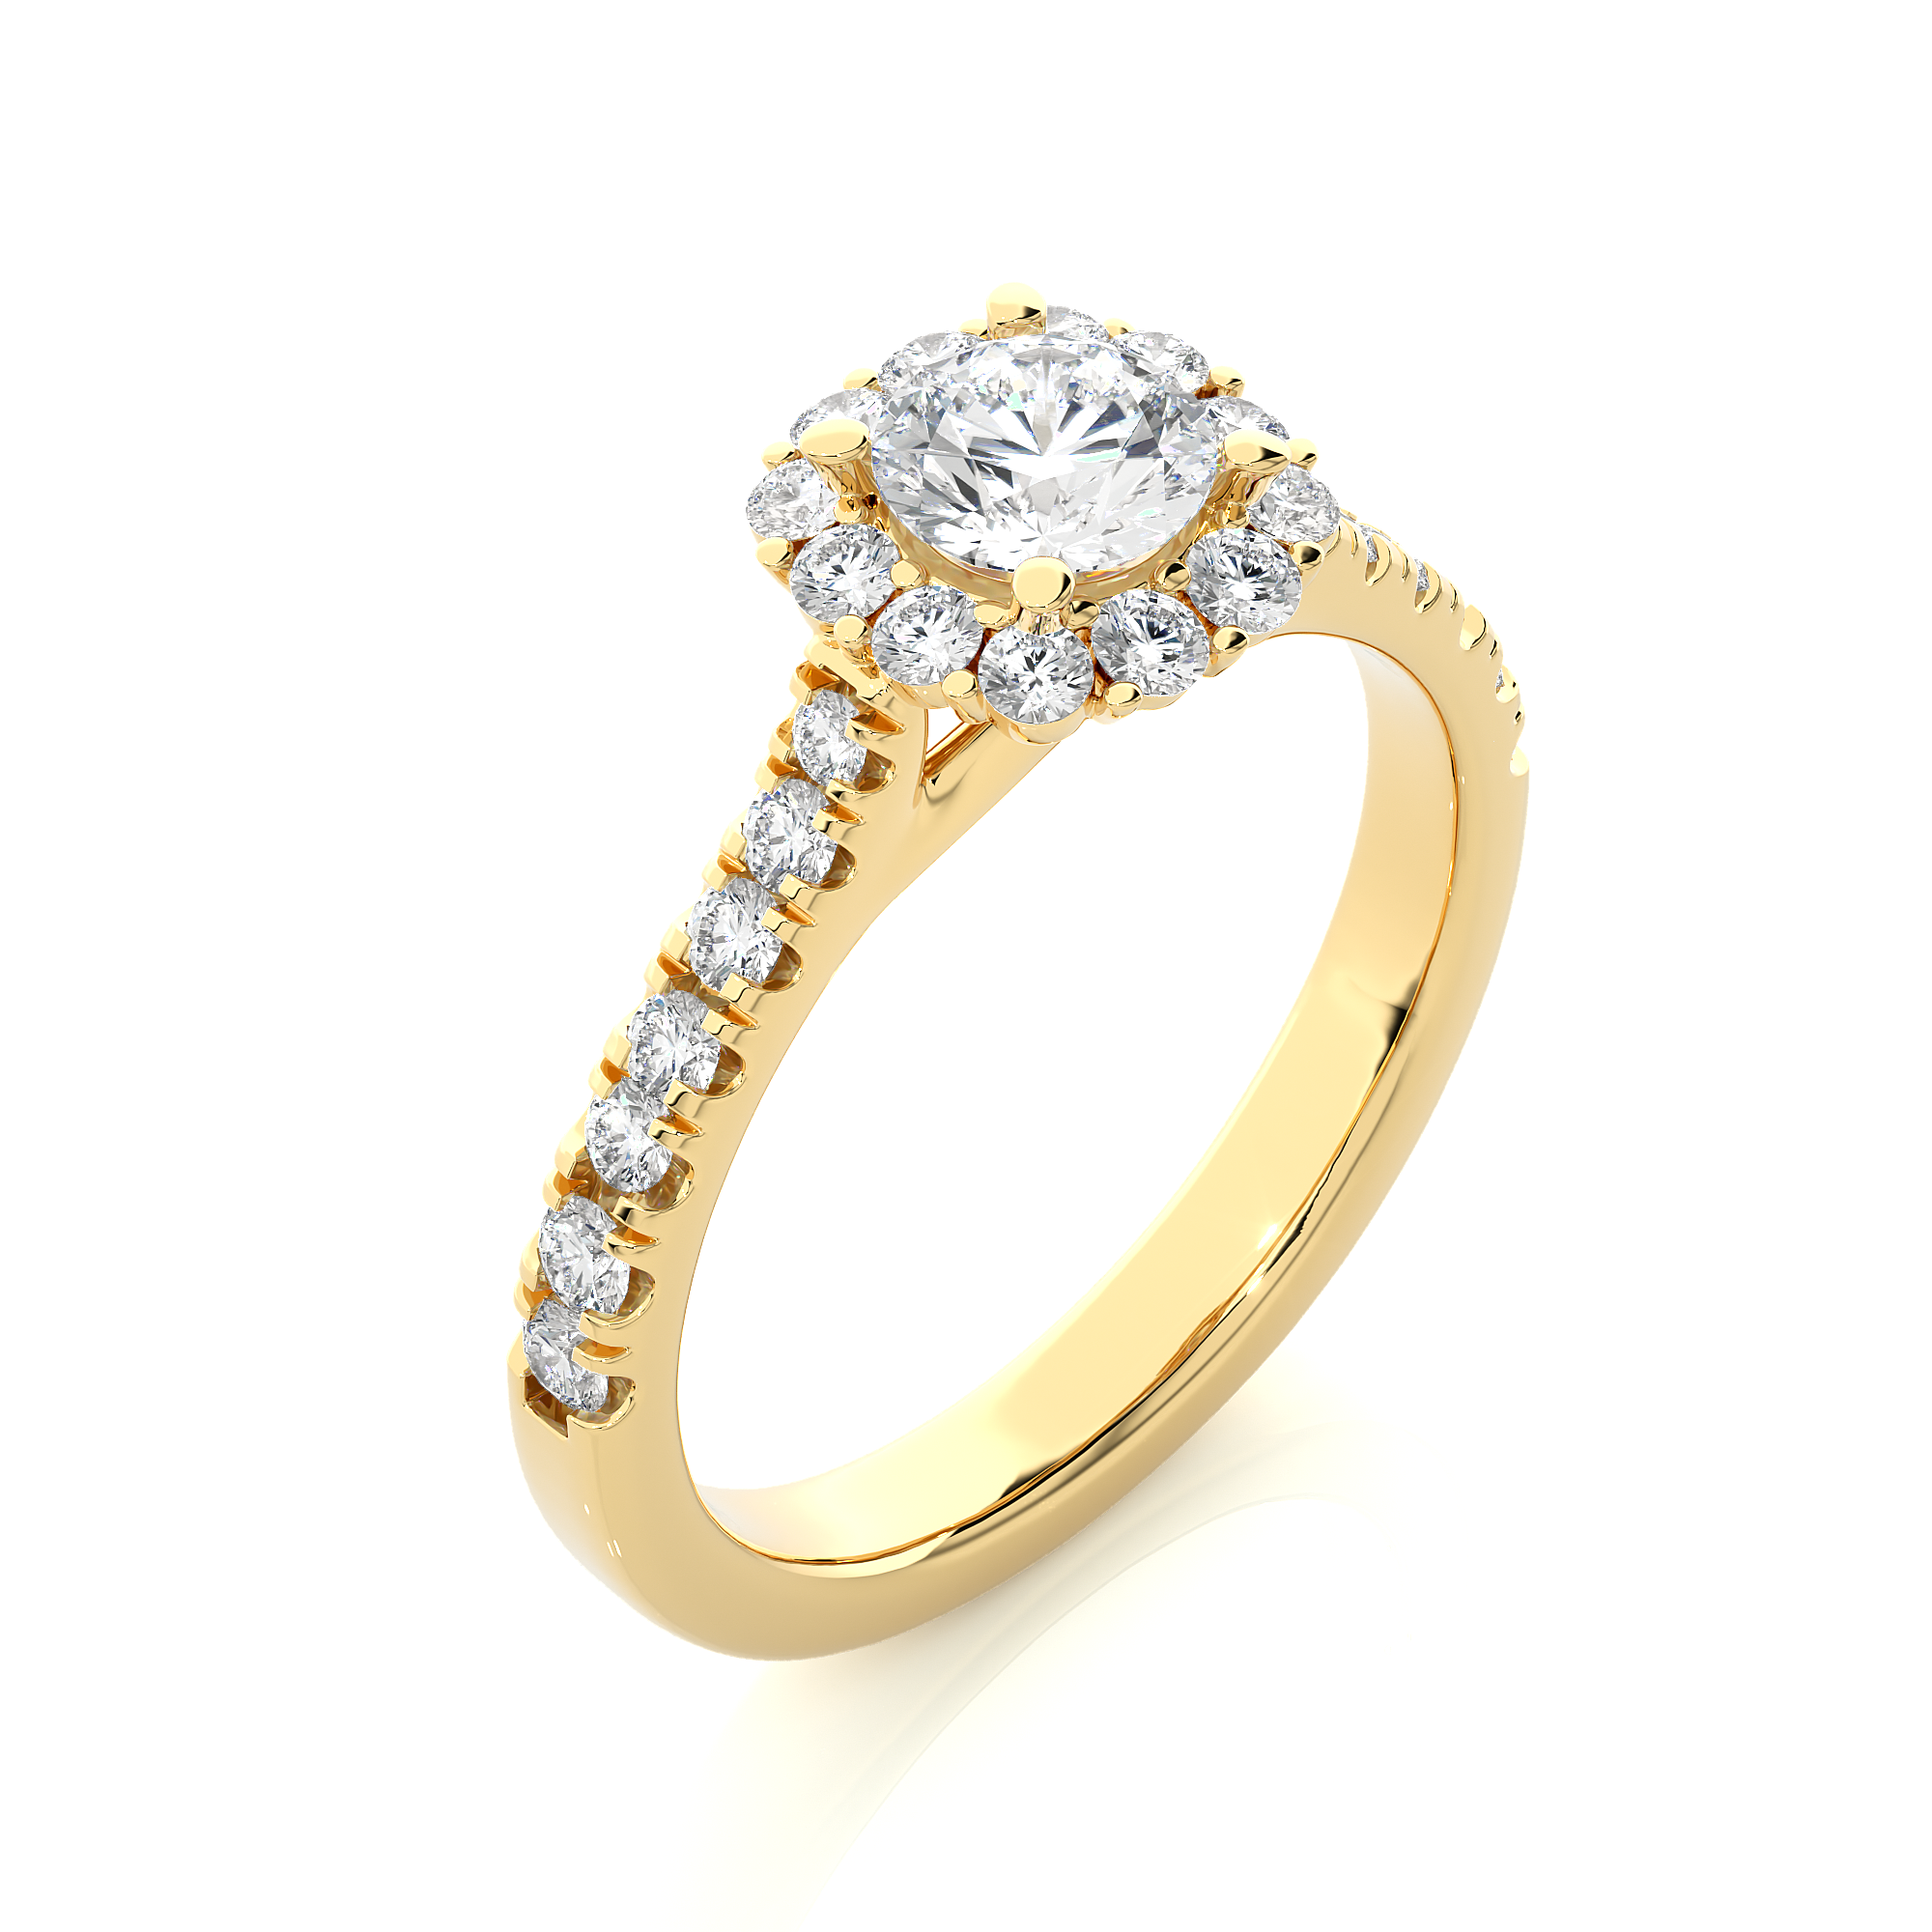 1.10Ct Round Shaped Solitaire Diamond Ring in 14Kt Gold - Blu Diamonds